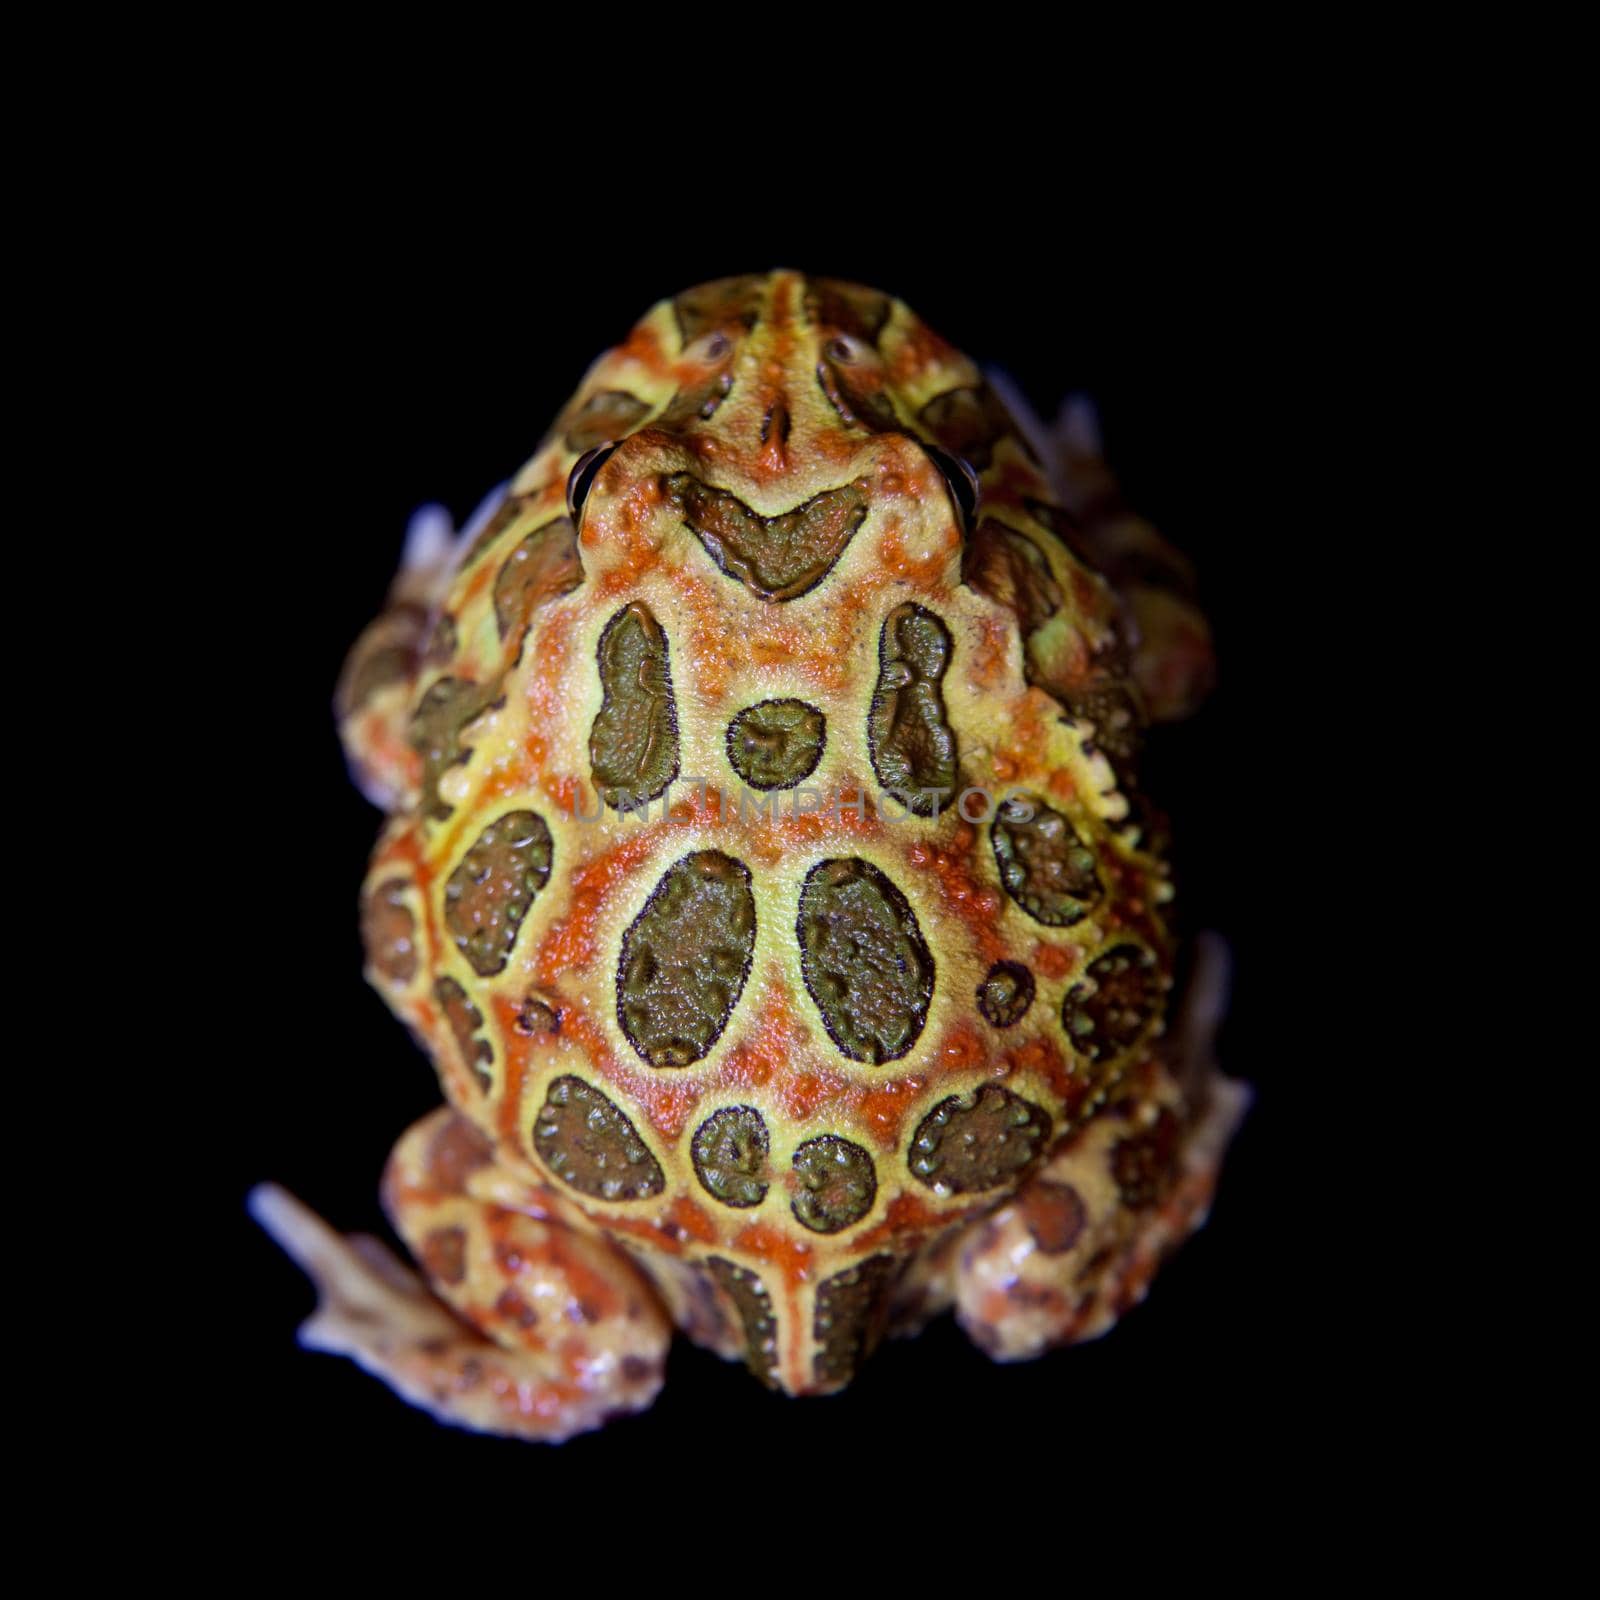 The chachoan horned frog isolated on black by RosaJay